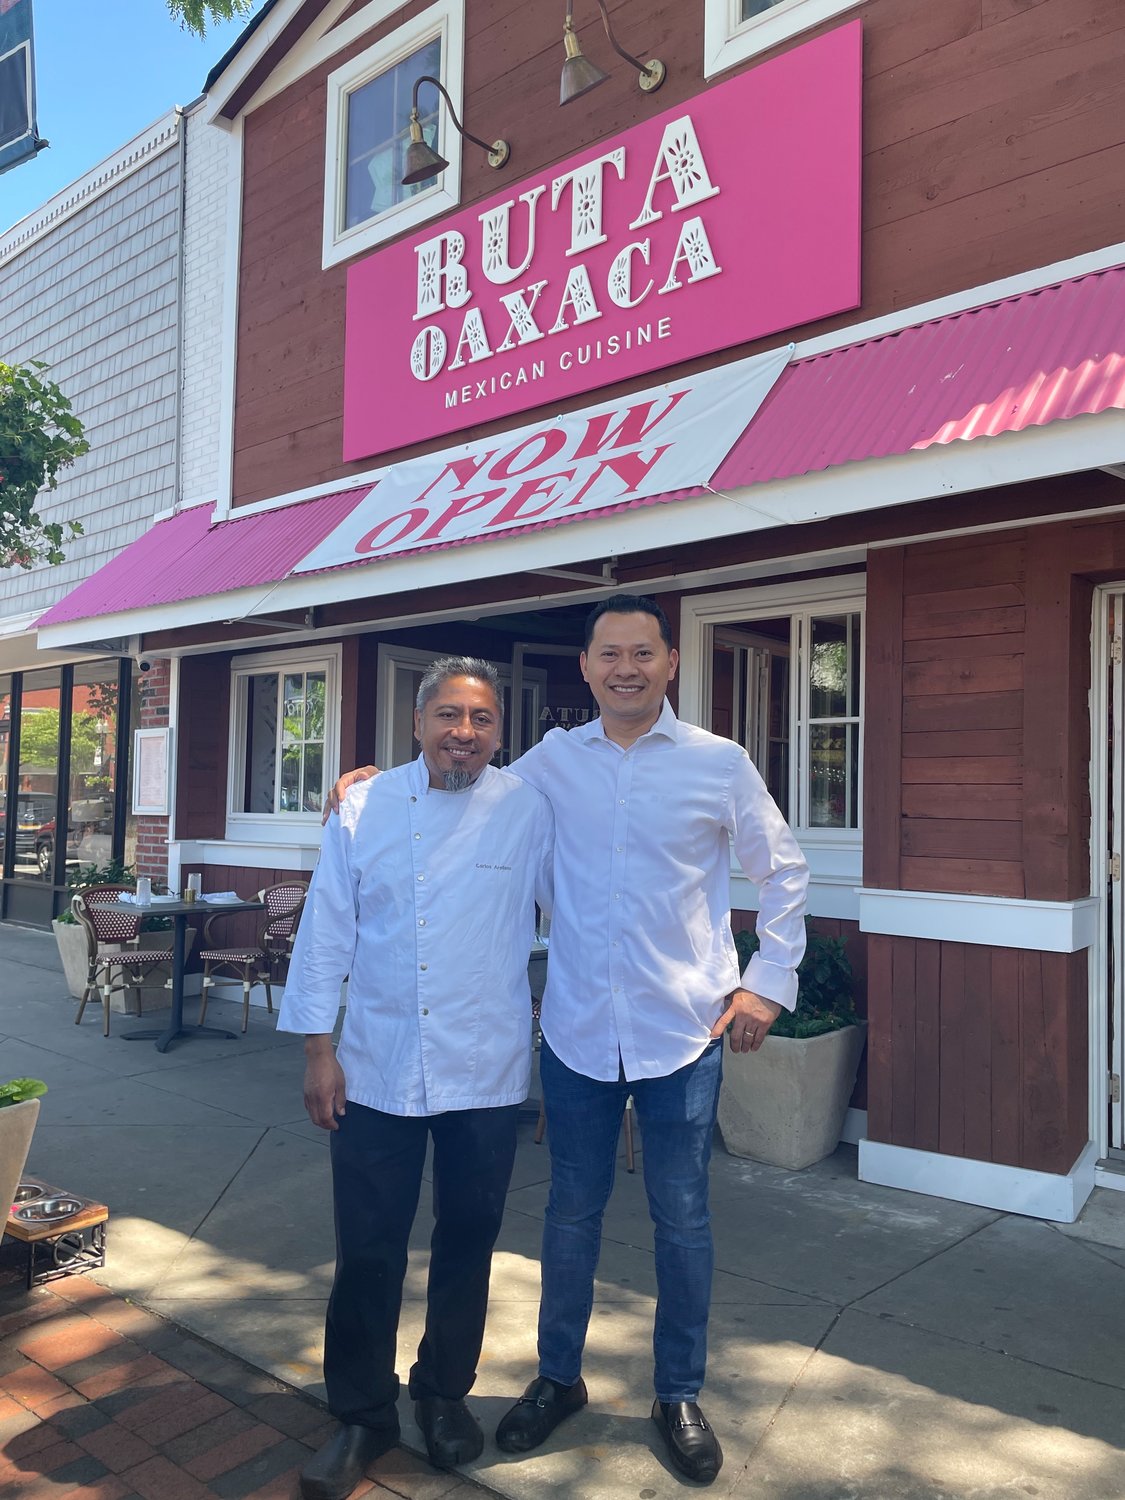 Co-owners Jose Castillo (right) and chef Carlos Arellano (left) stand outside their home-gourmet inspired Mexican restaurant.